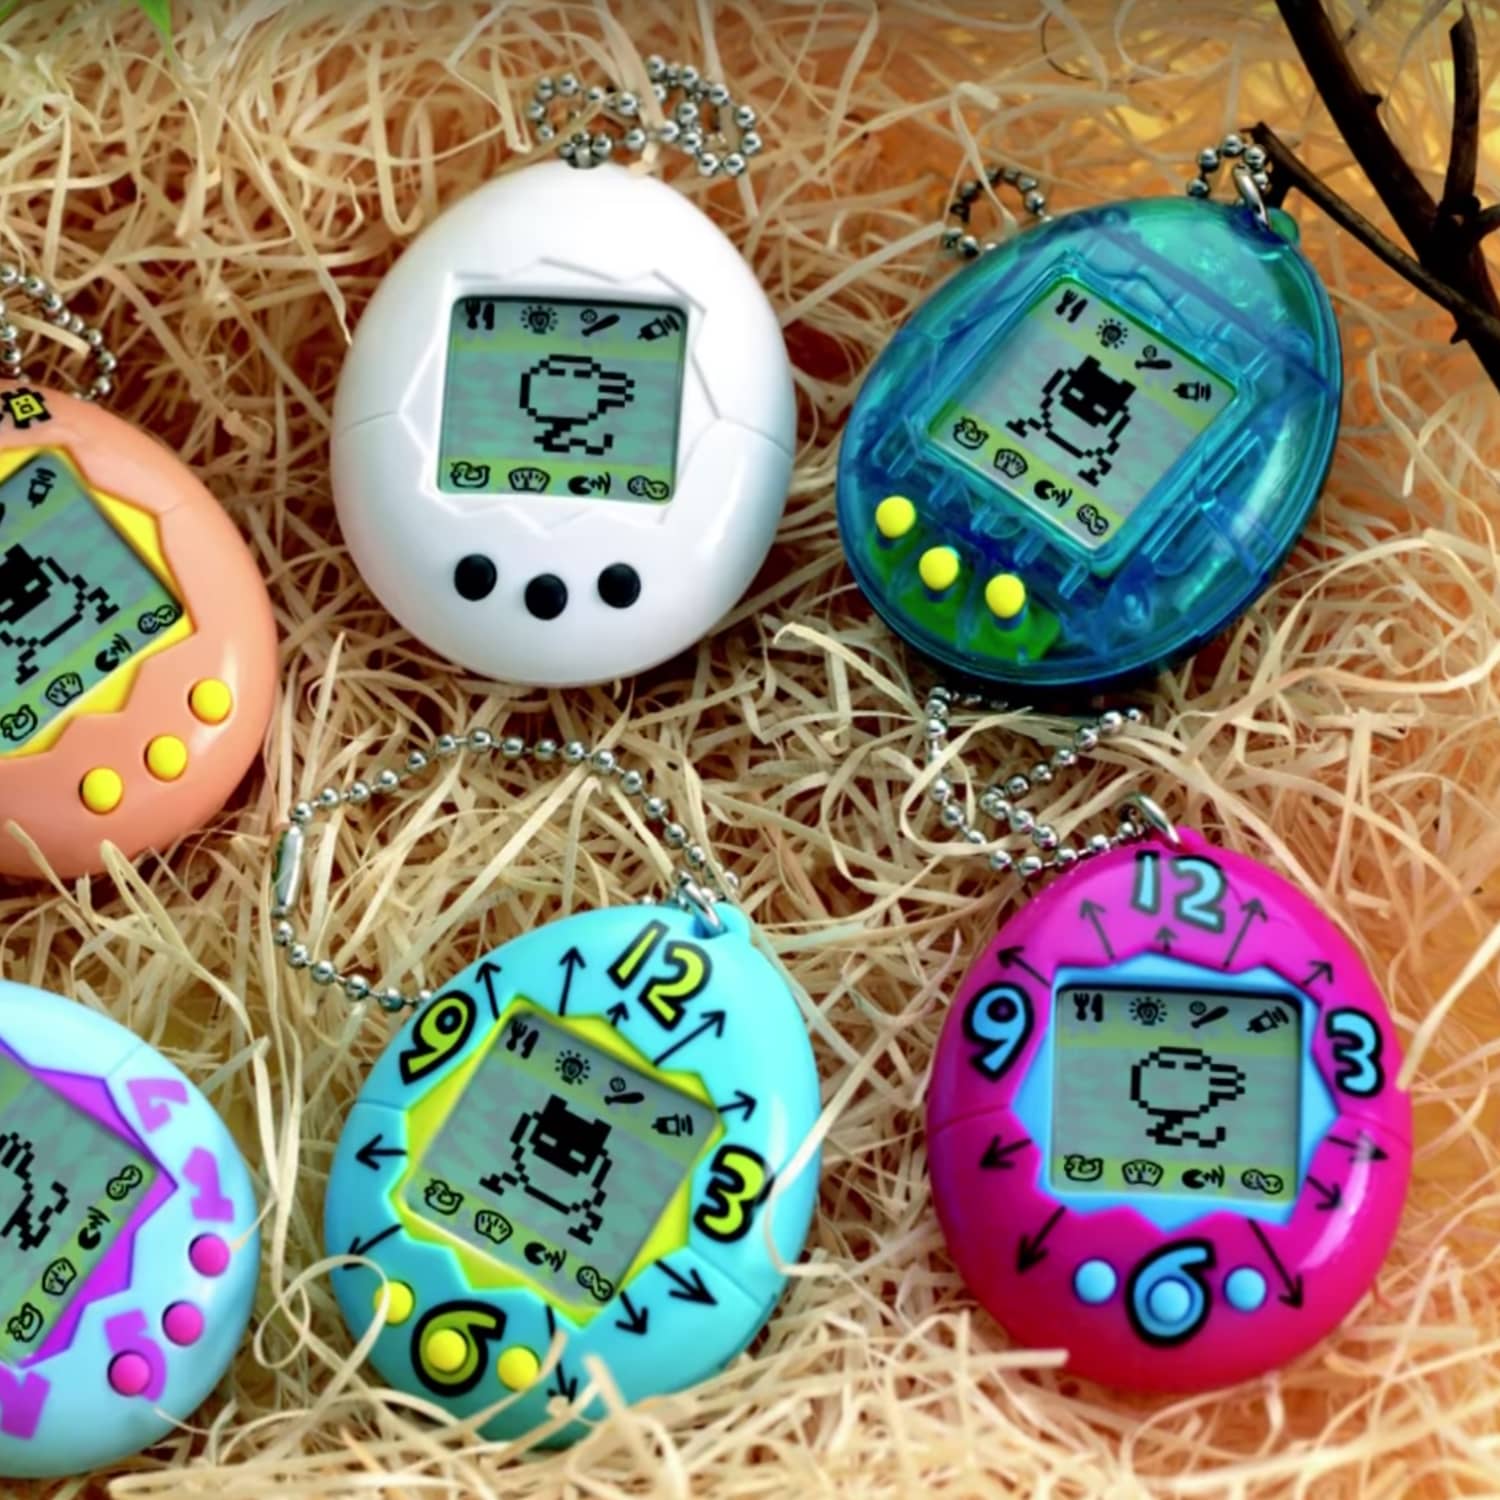 The Tamagotchi Is Back and the '90s Renaissance Continues